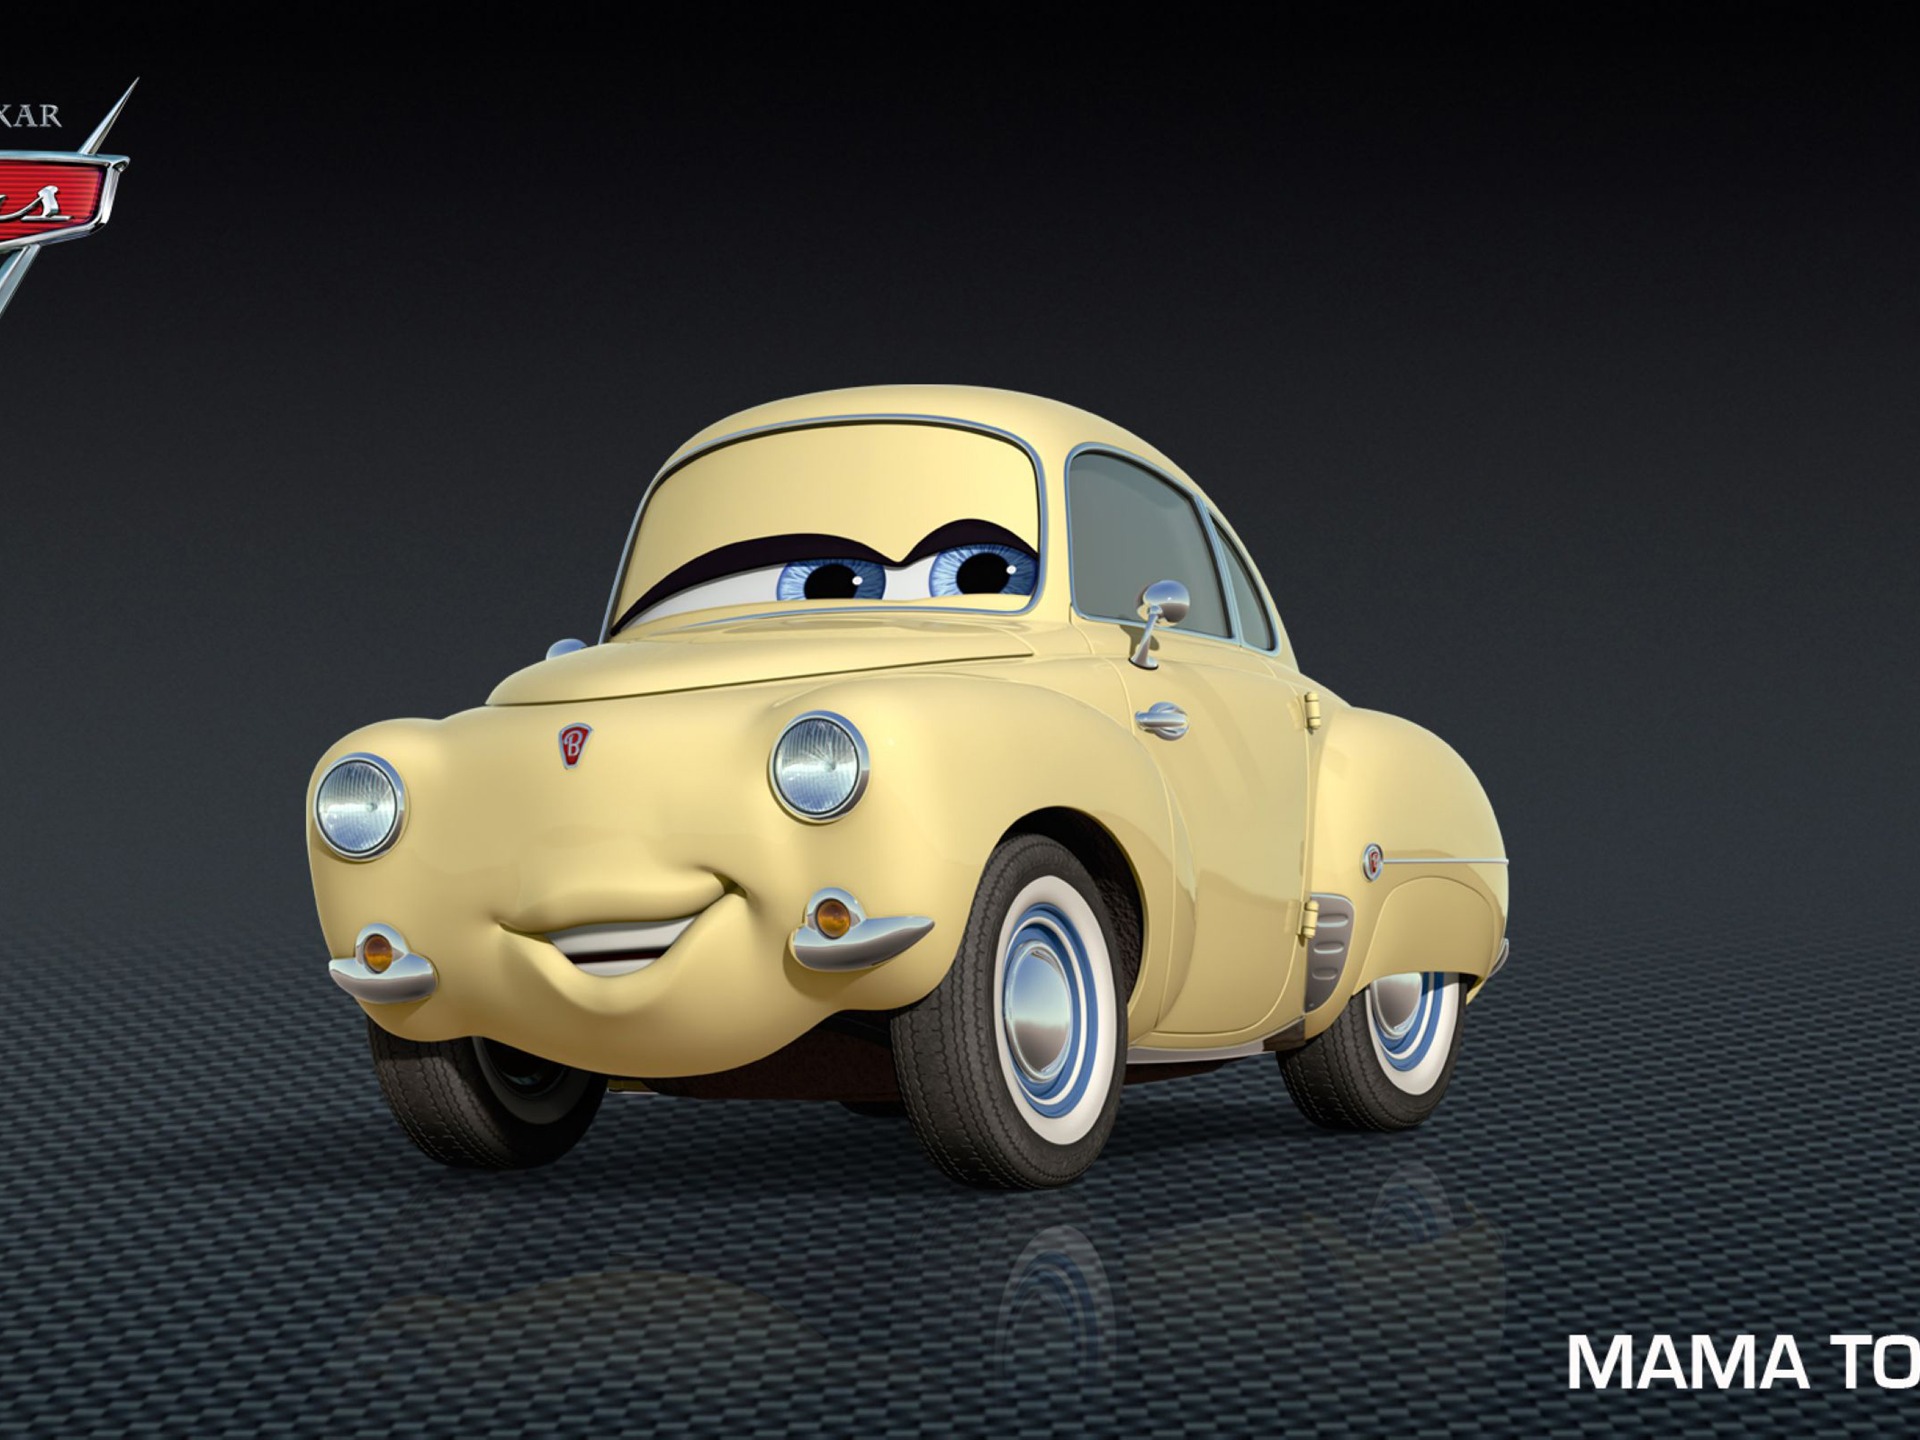 Cars 2 wallpapers #27 - 1920x1440